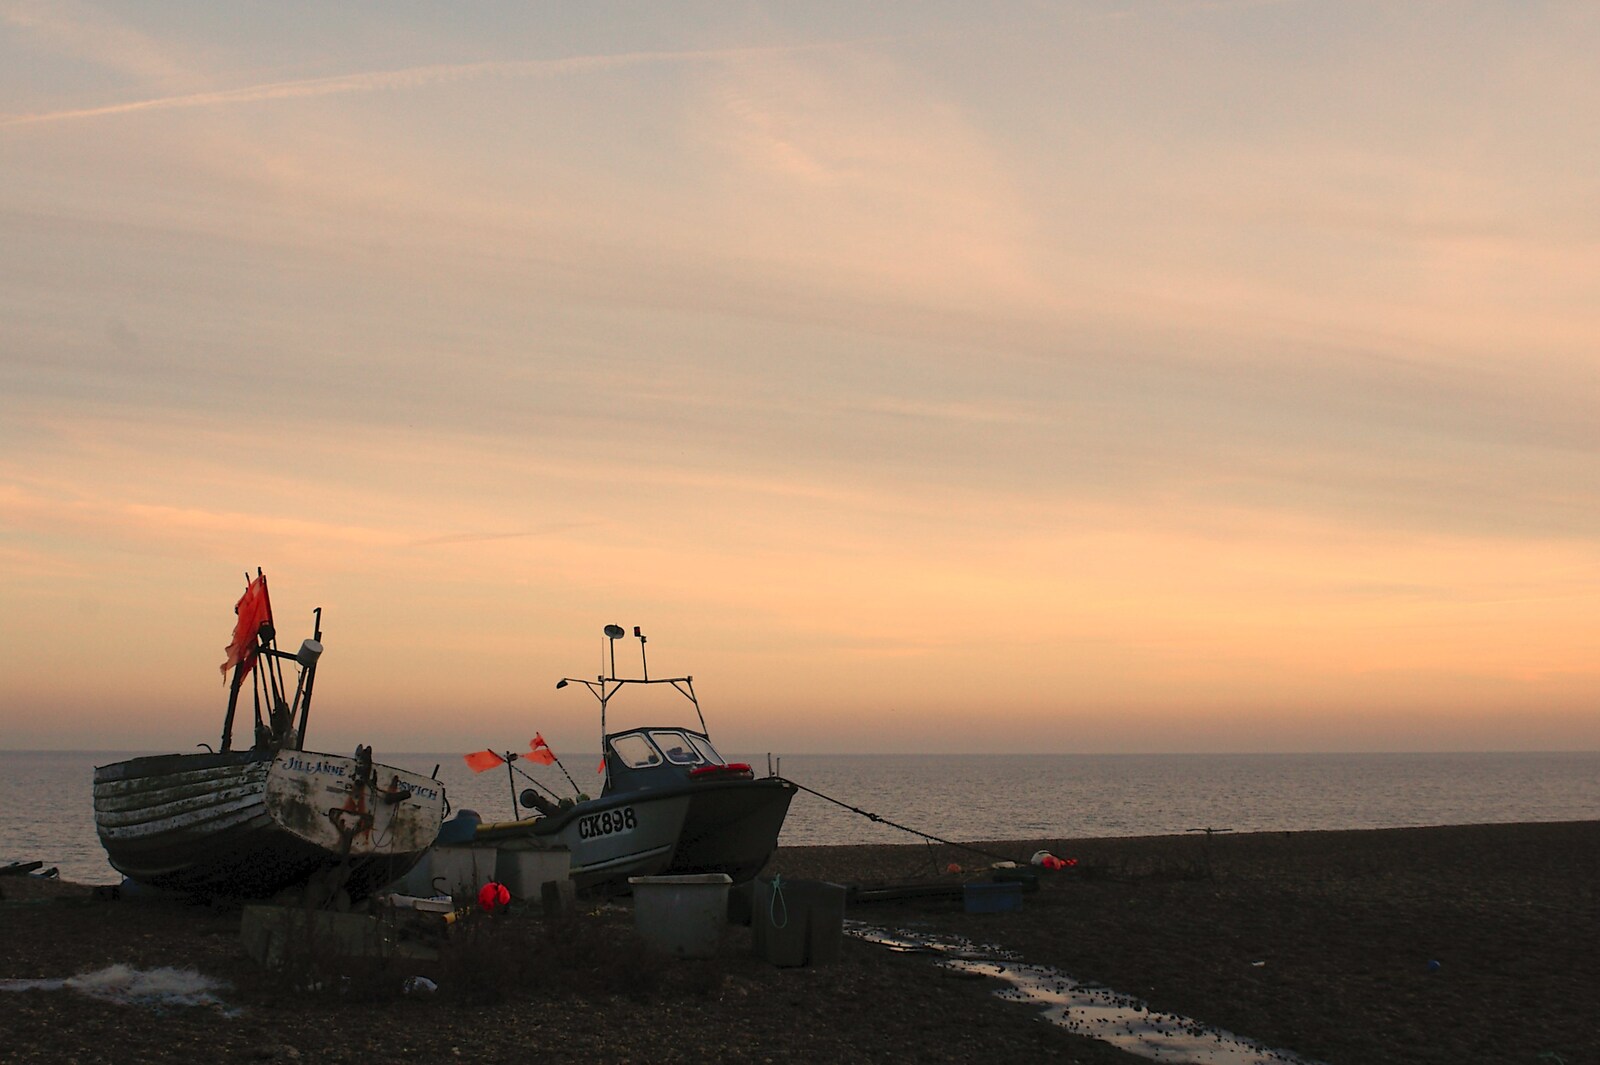 Fishing boats in the sunset from A Day with Sis, Matt and the Old Man, Saxmundham, Suffolk - 28th December 2004